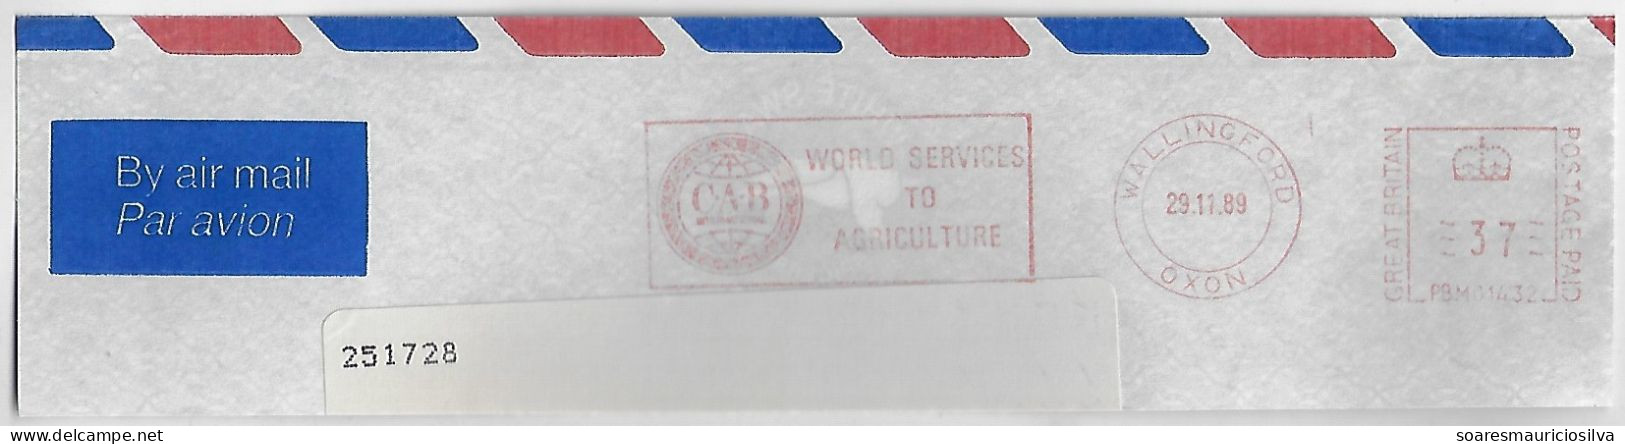 Great Britain 1989 Meter Stamp Pitney Bowes 5000 Slogan CAB International World Services To Agriculture Wallingford - Briefe U. Dokumente